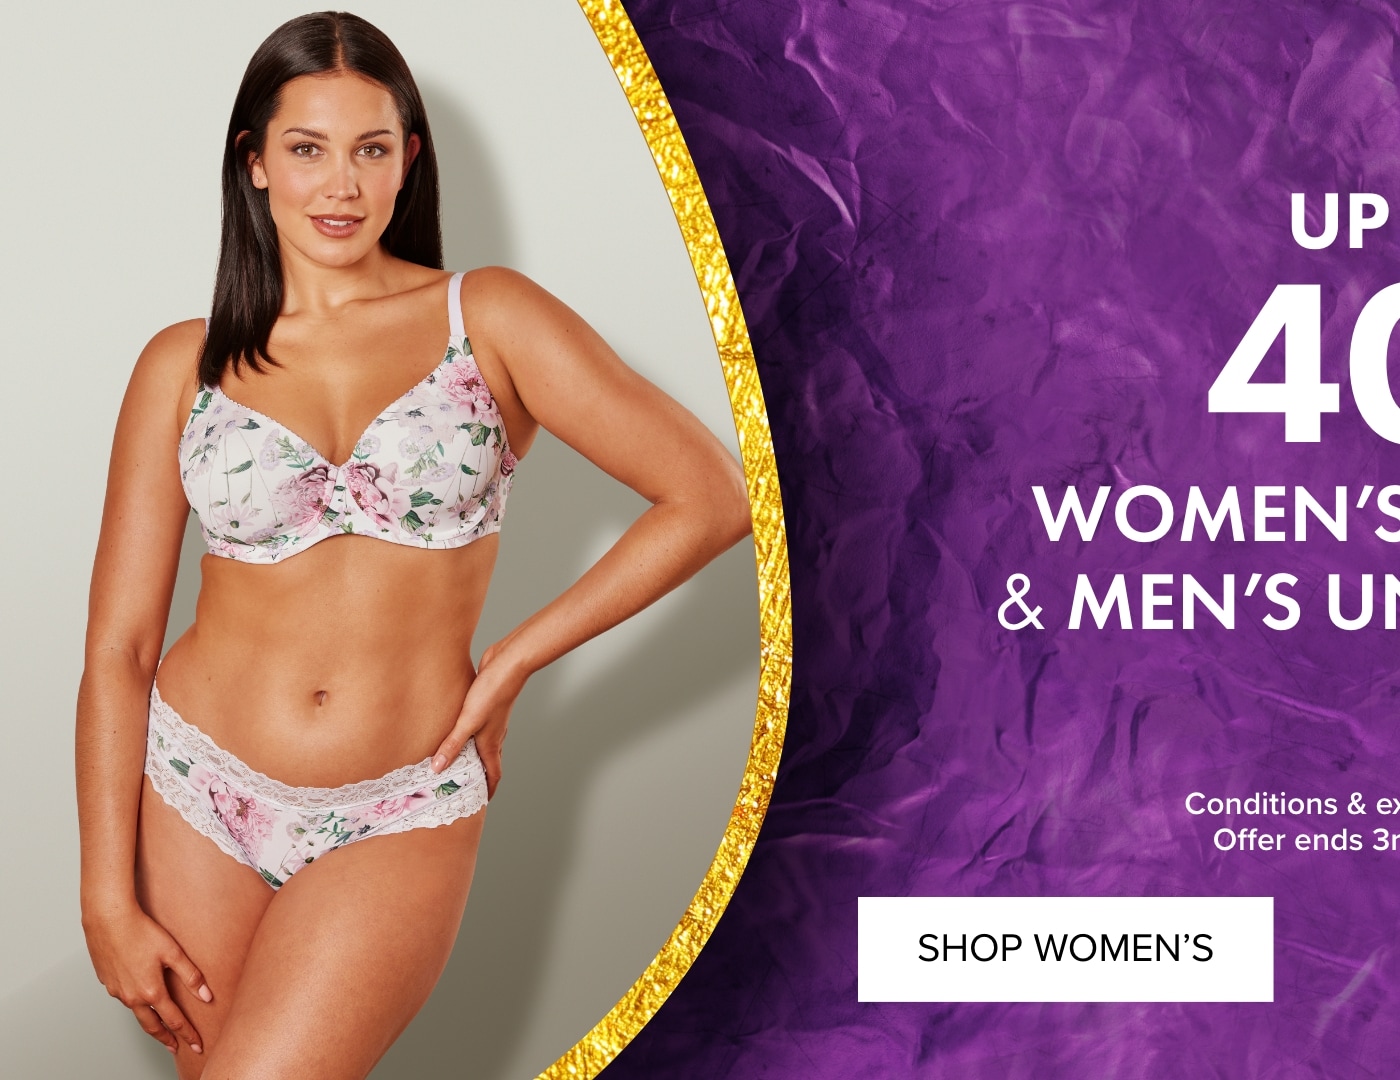 Up to 40% off Women's Lingerie